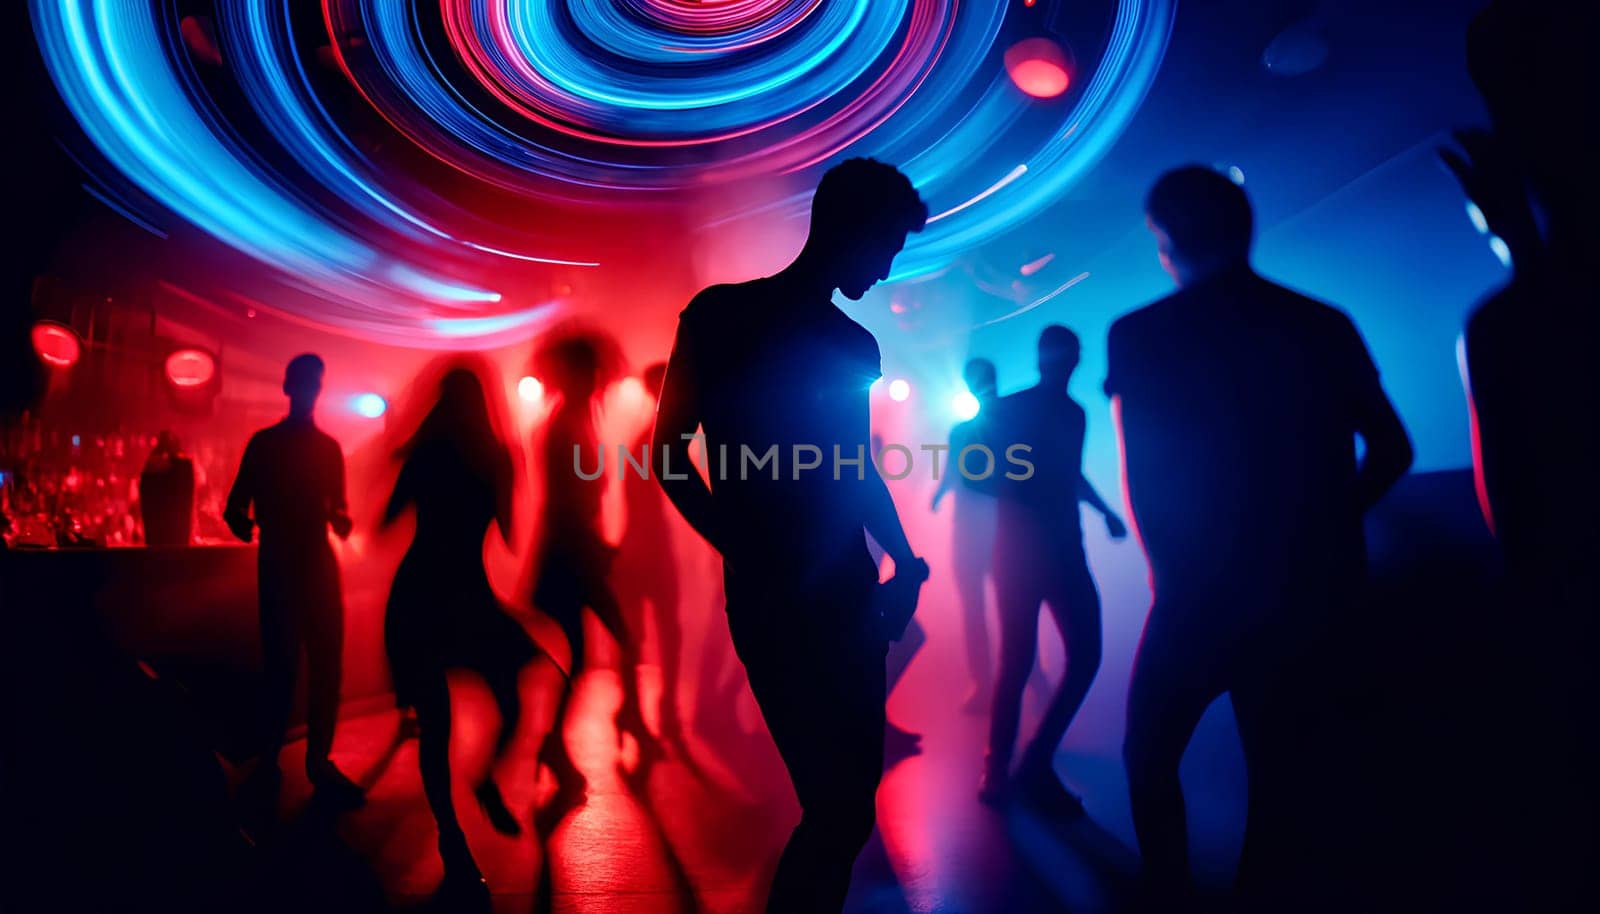 silhouettes of dancing people in a nightclub under bright blue and red abstract club lights by Annado